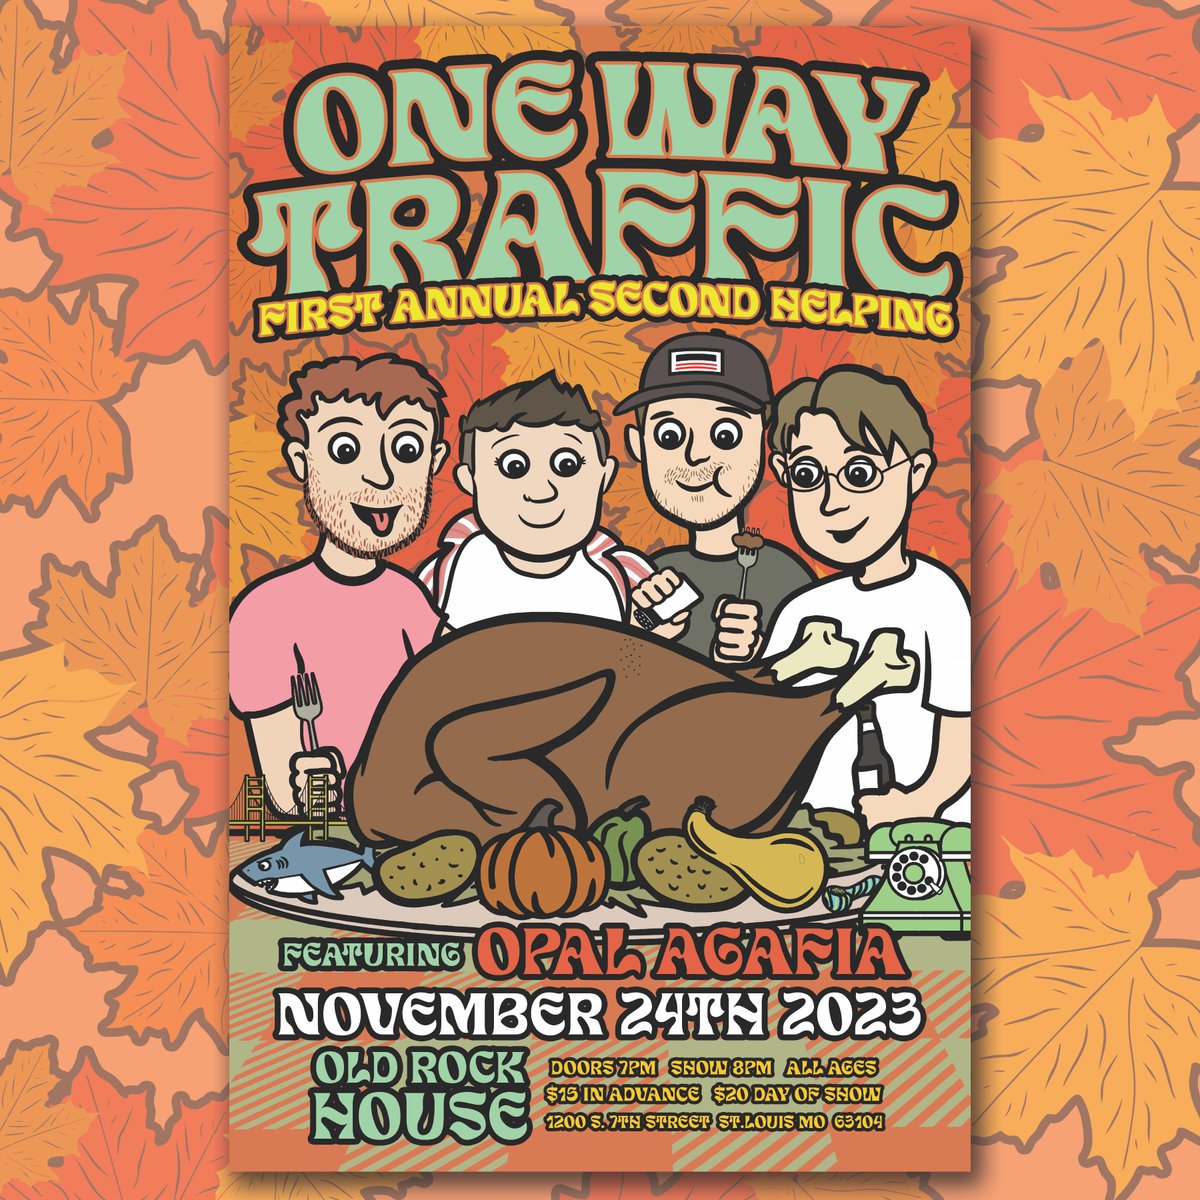 🍴 BLACK FRIDAY ANNOUNCEMENT! 🍴 The day after Thanksgiving, you can come fill up on second helpings with One Way Traffic ft. Opal Agafia at Old Rock House 🍗 🥧 🎟️ Tickets on sale this Friday, September 29 at 10am ⏰ bit.ly/469cviO